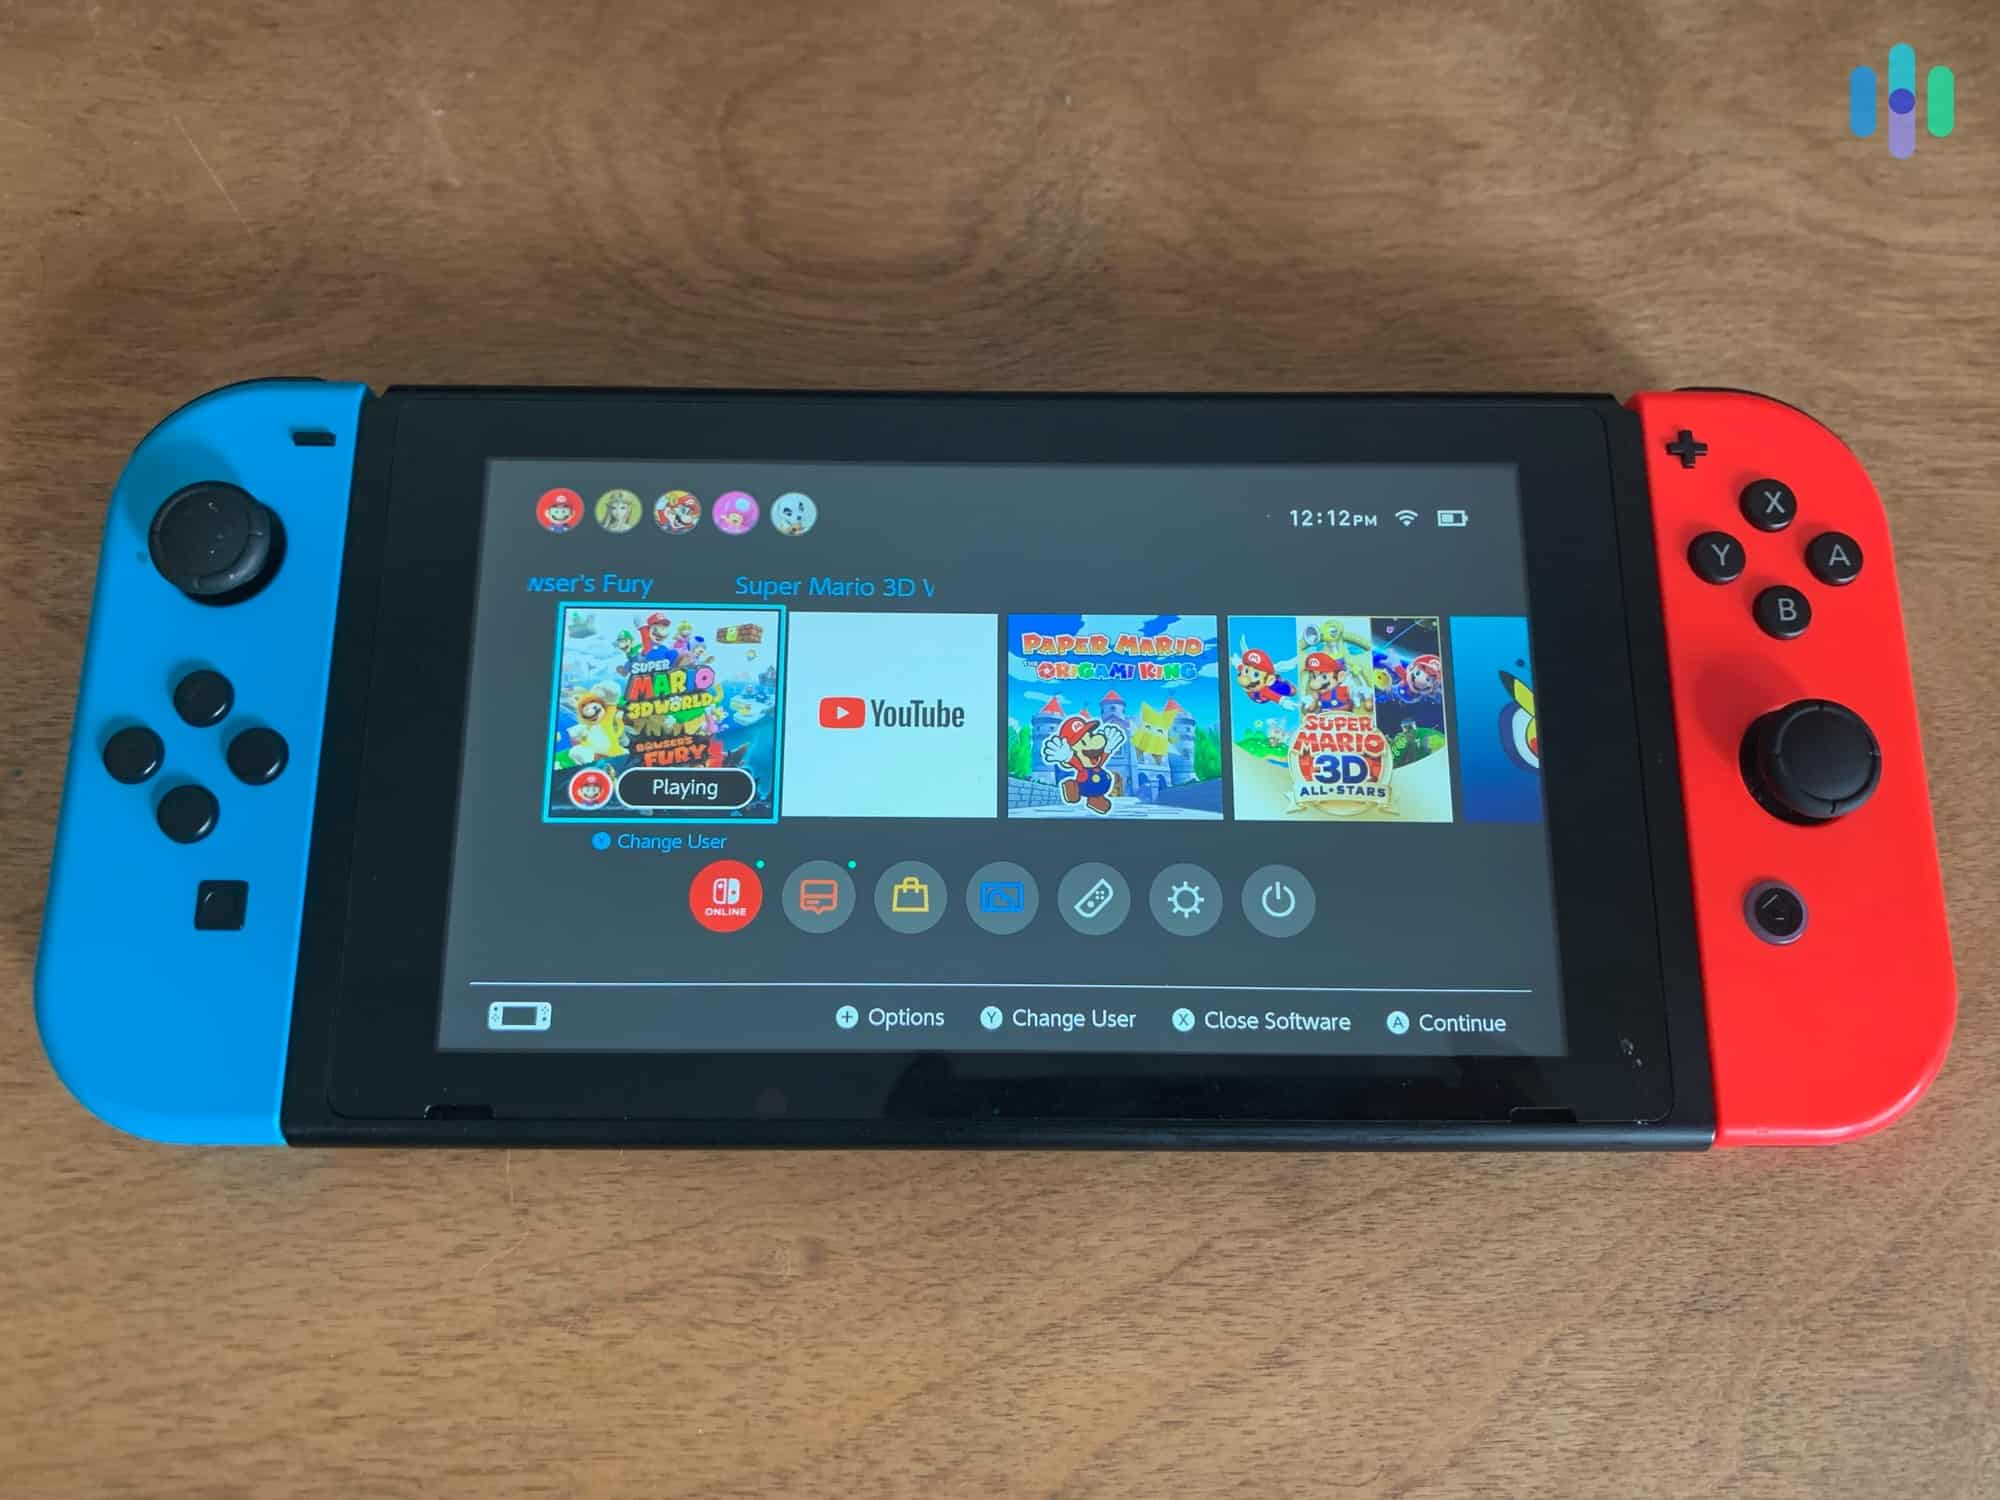 Why Can't Nintendo Offer Both Virtual Console And Switch Online?